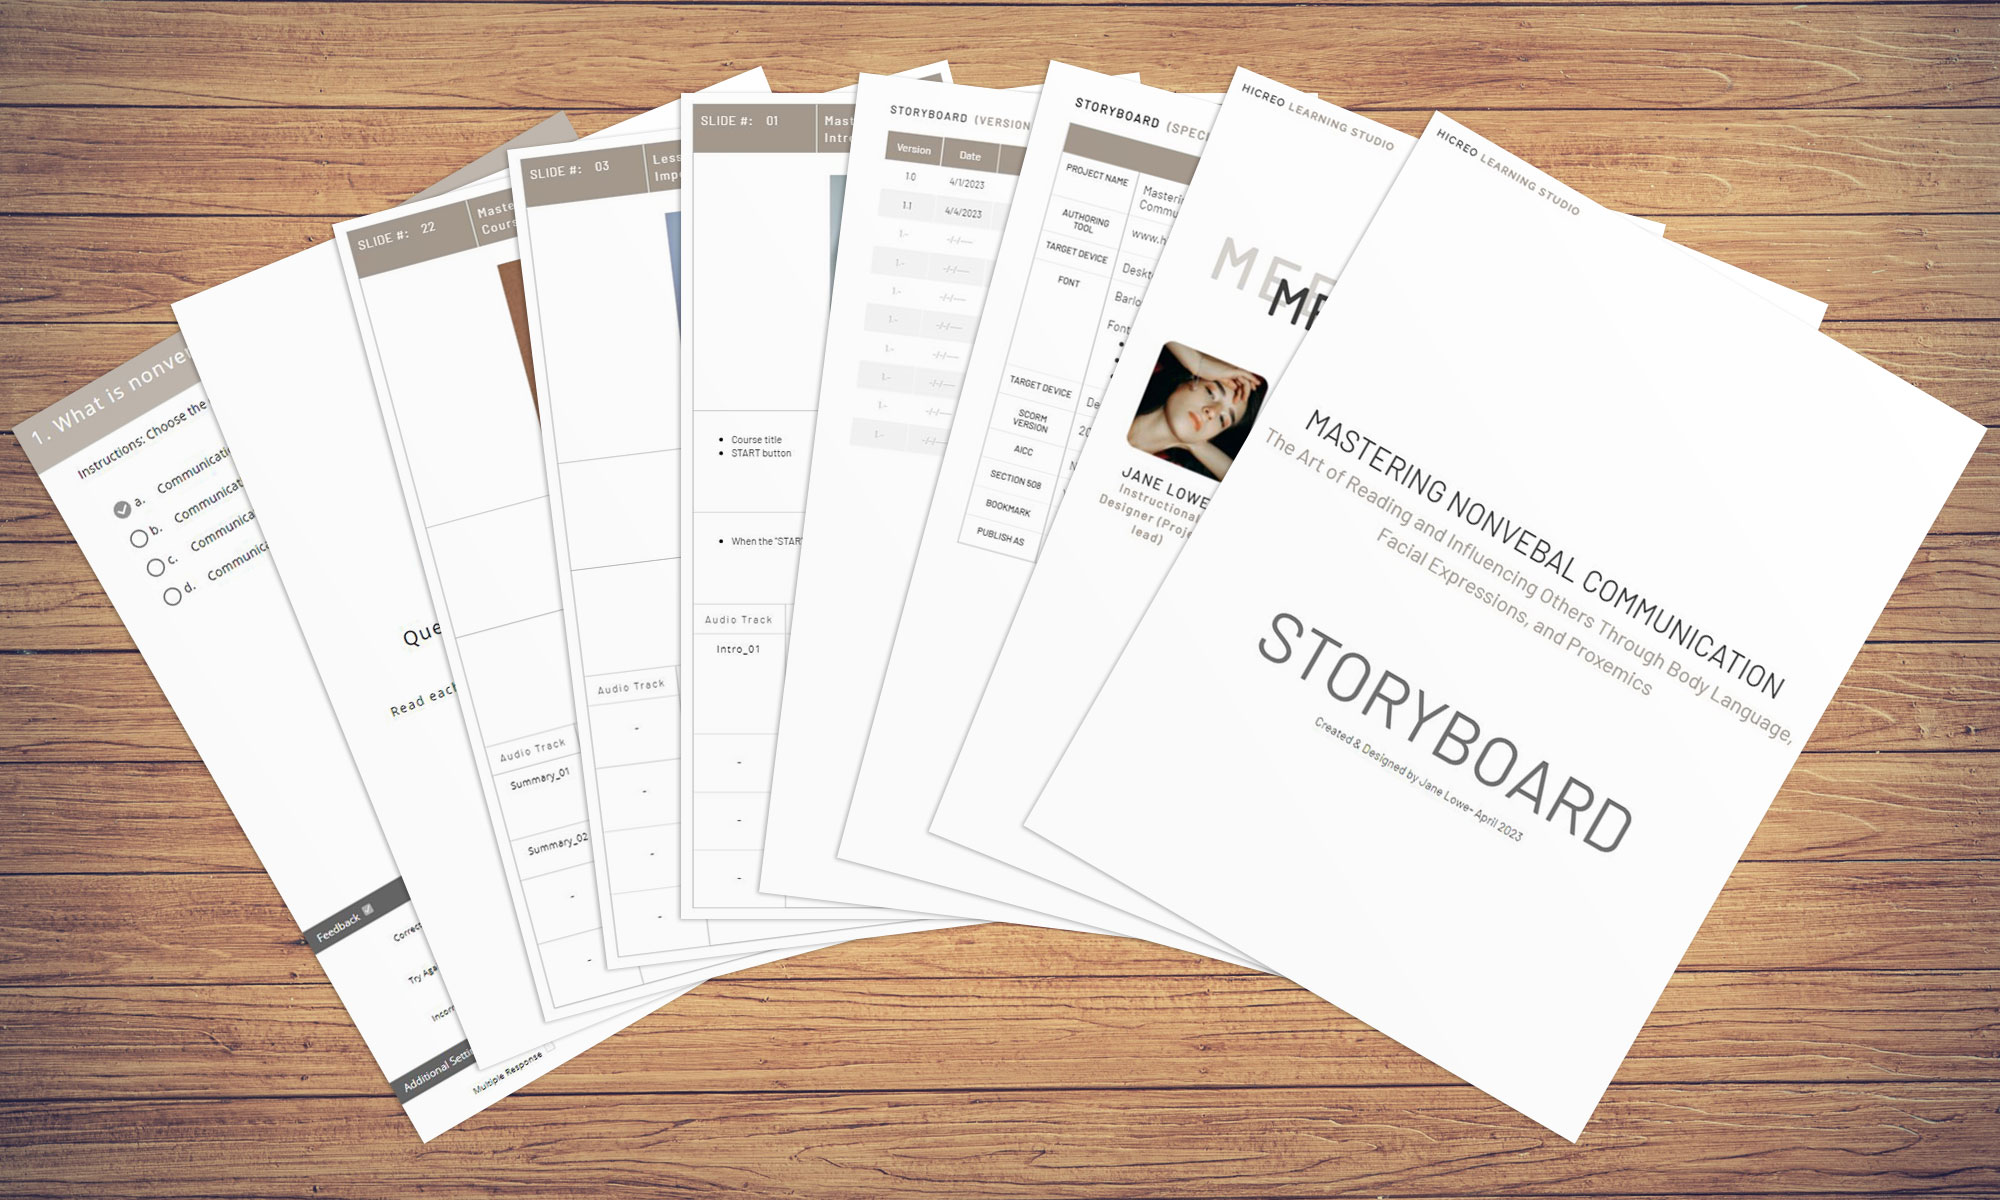 eLearning storyboard templates spread on a desk with the course title 'Mastering Nonverbal Communication: The Art of Reading and Influencing Others Through Body Language, Facial Expressions, and Proxemics' created using the hiCreo platform